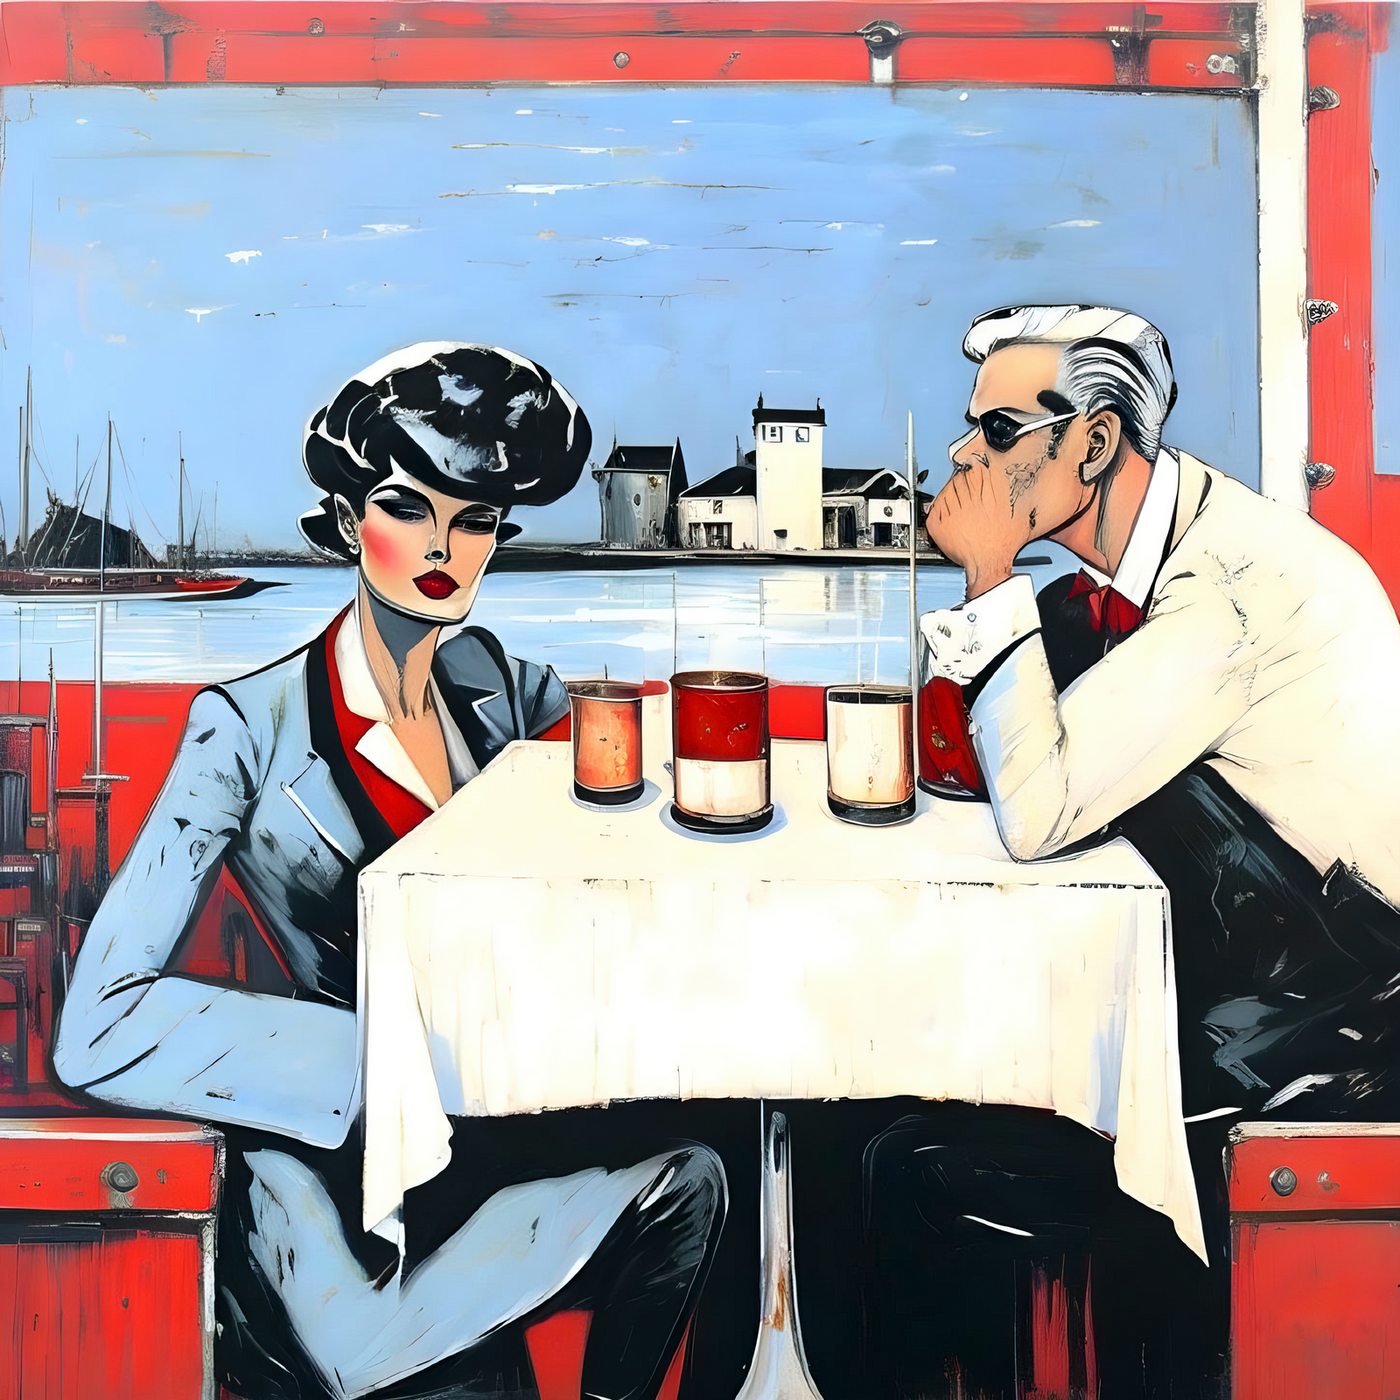 Breakfast Conversation - Gallery Wrapped Canvas